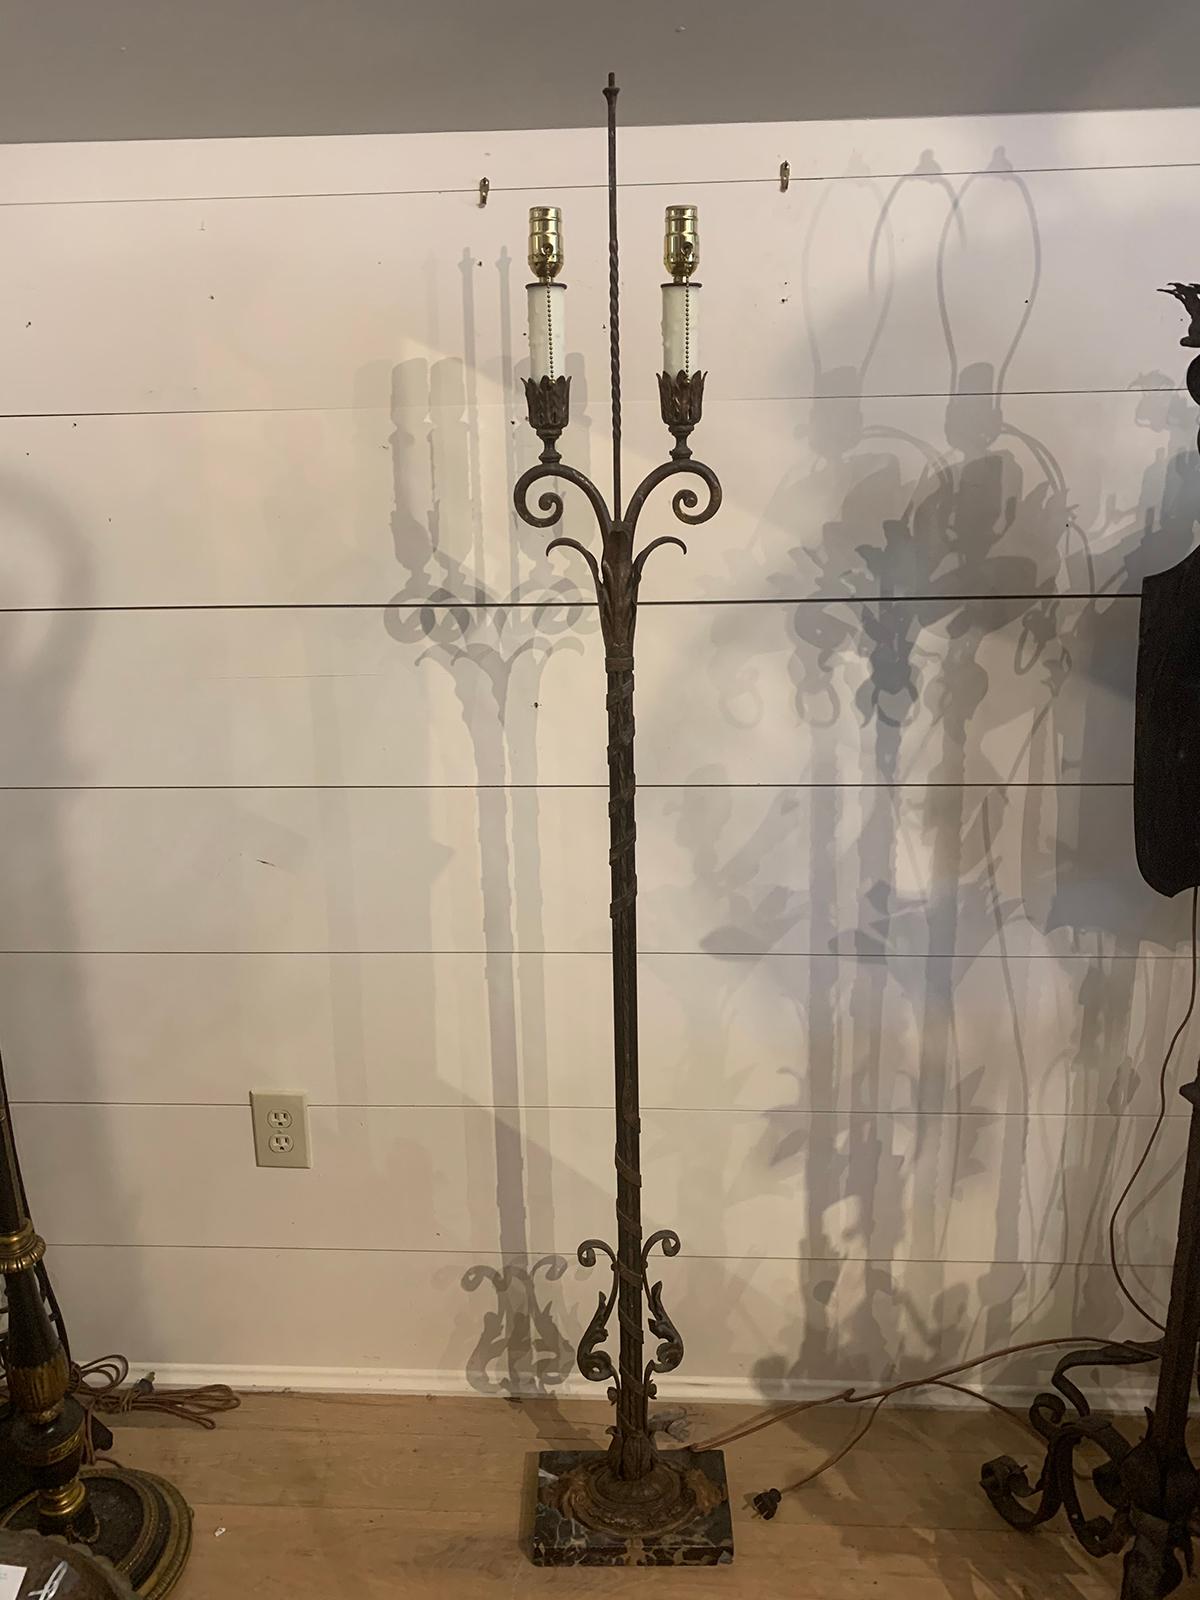 Early 20th century iron and marble two-arm floor lamp
Measures: Overall: 10